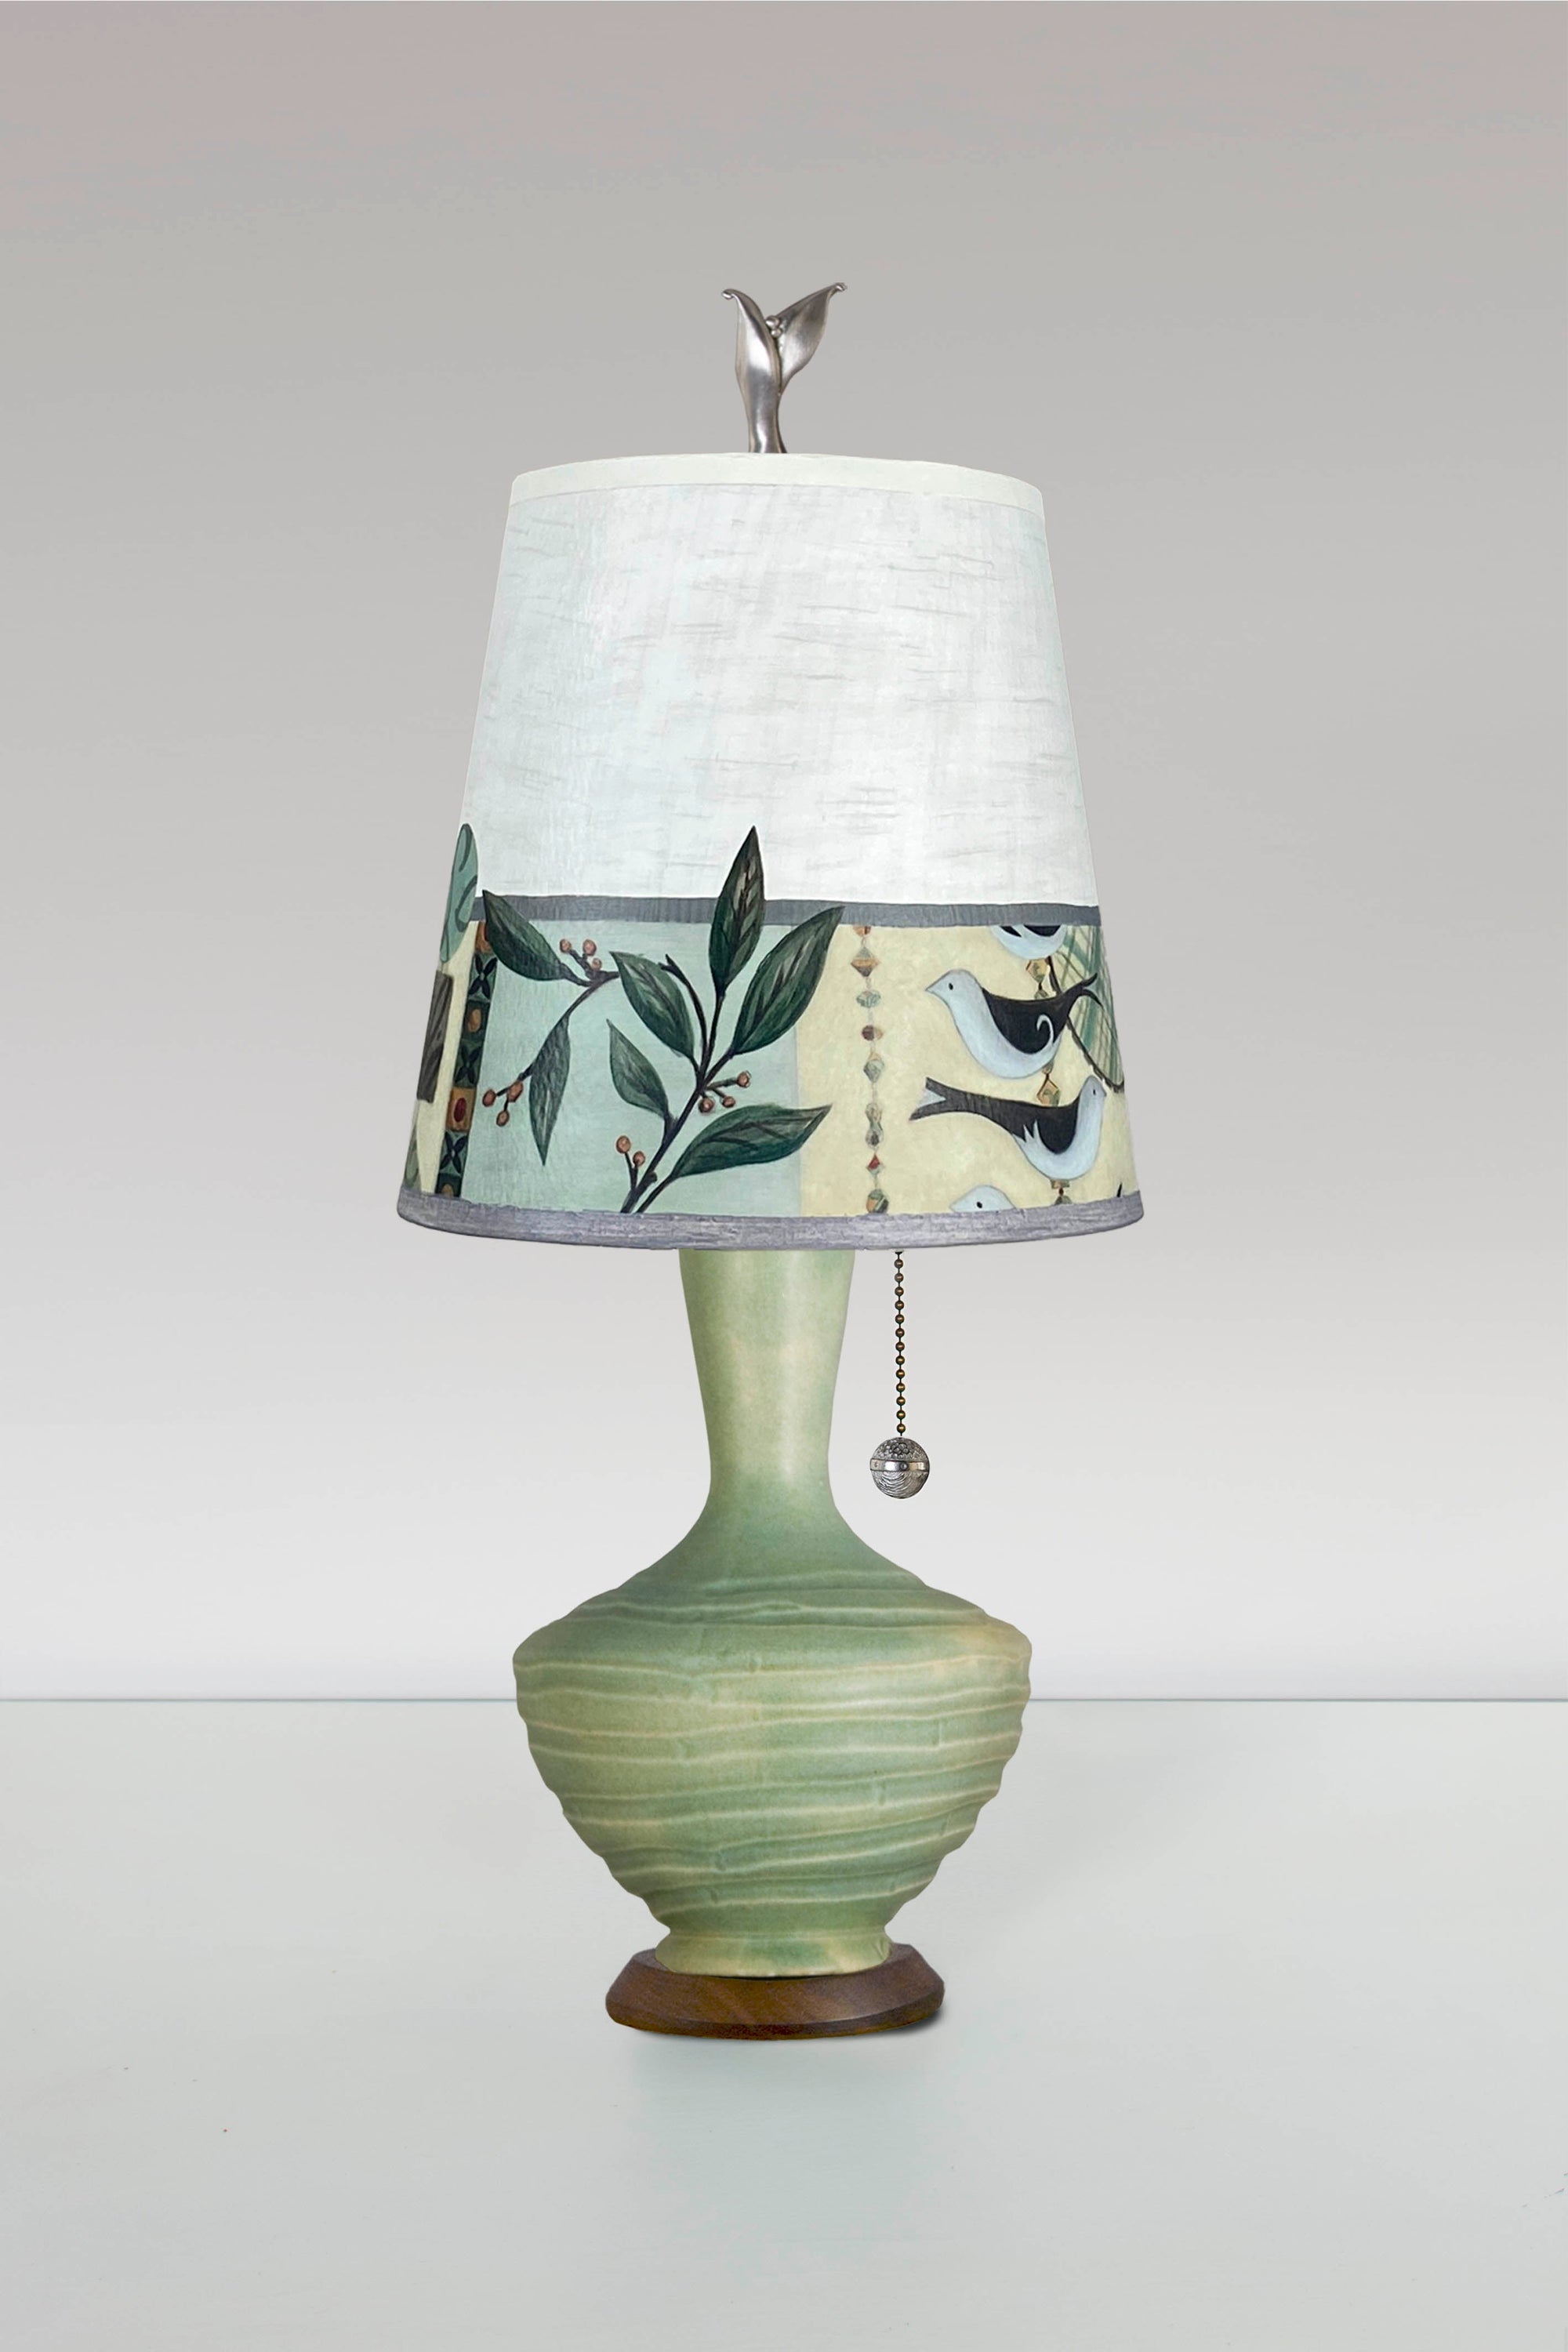 Janna Ugone & Co Table Lamp Ceramic Table Lamp in Old Copper with Small Drum Shade in New Capri Opal